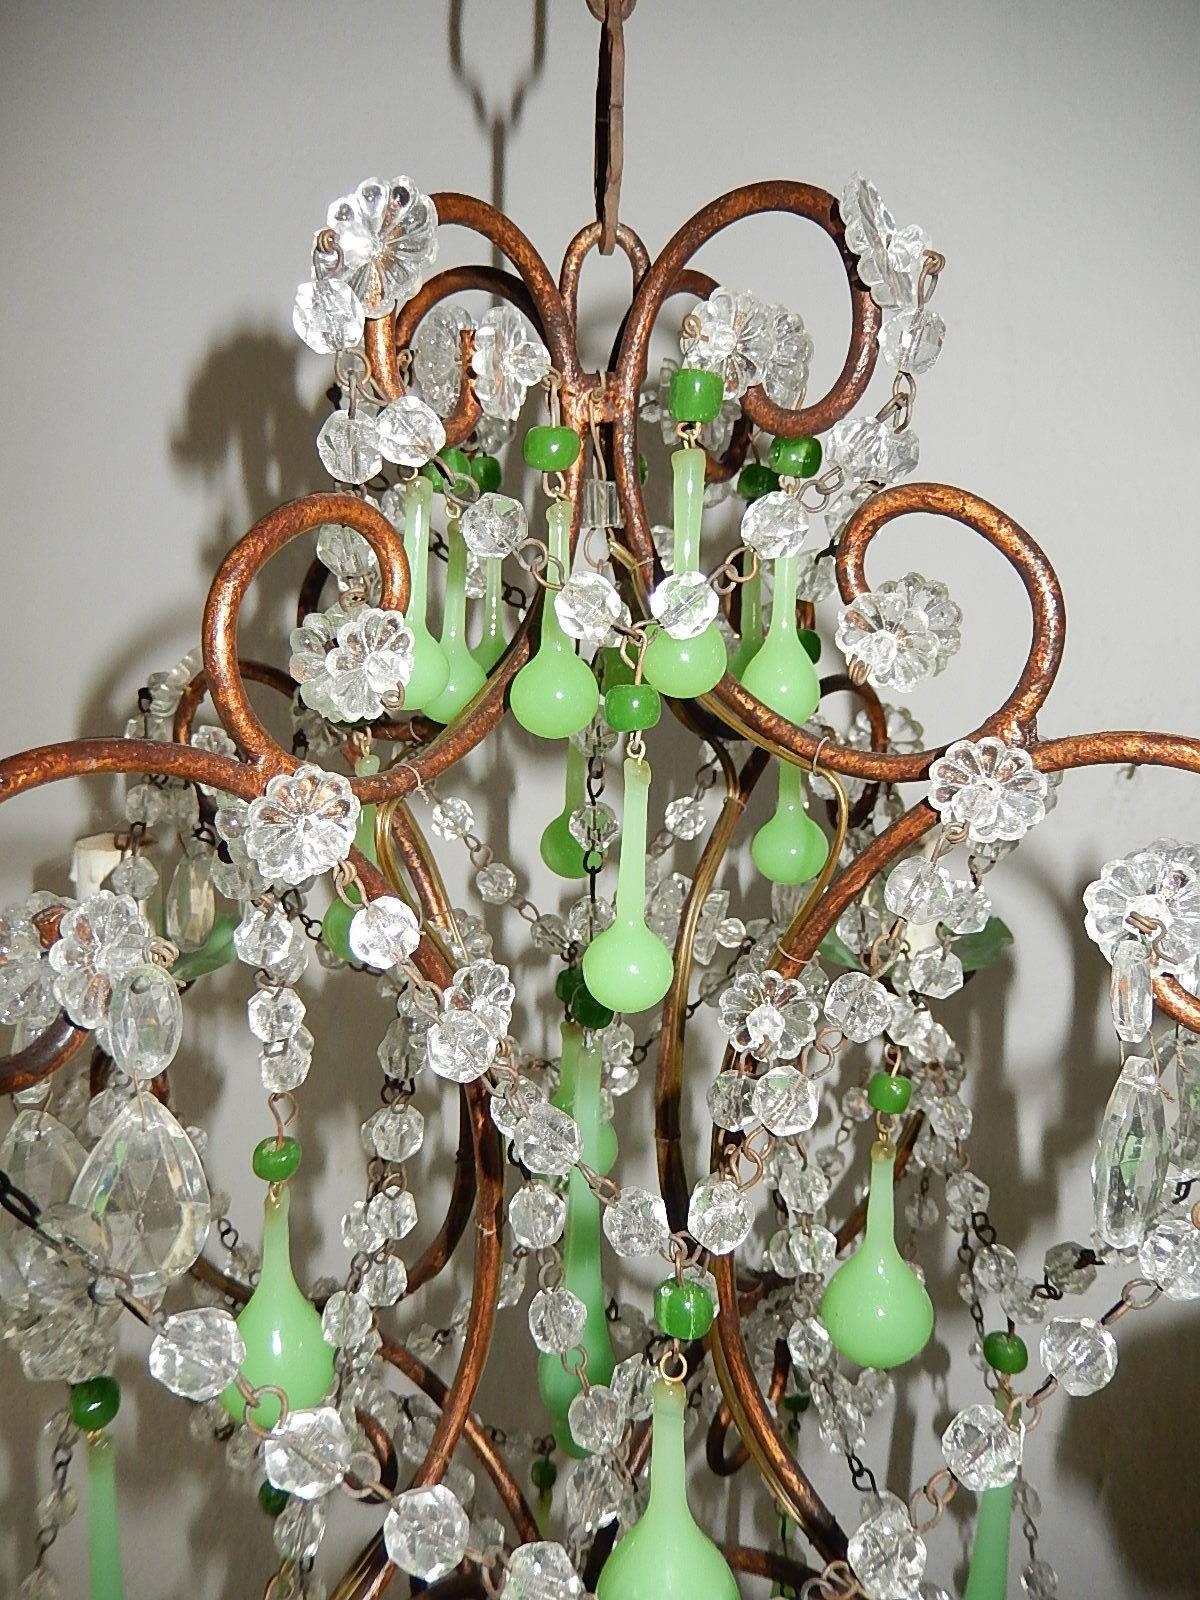 Baroque 1920 French Green Opaline Bobeches, Beads and Drops Chandelier